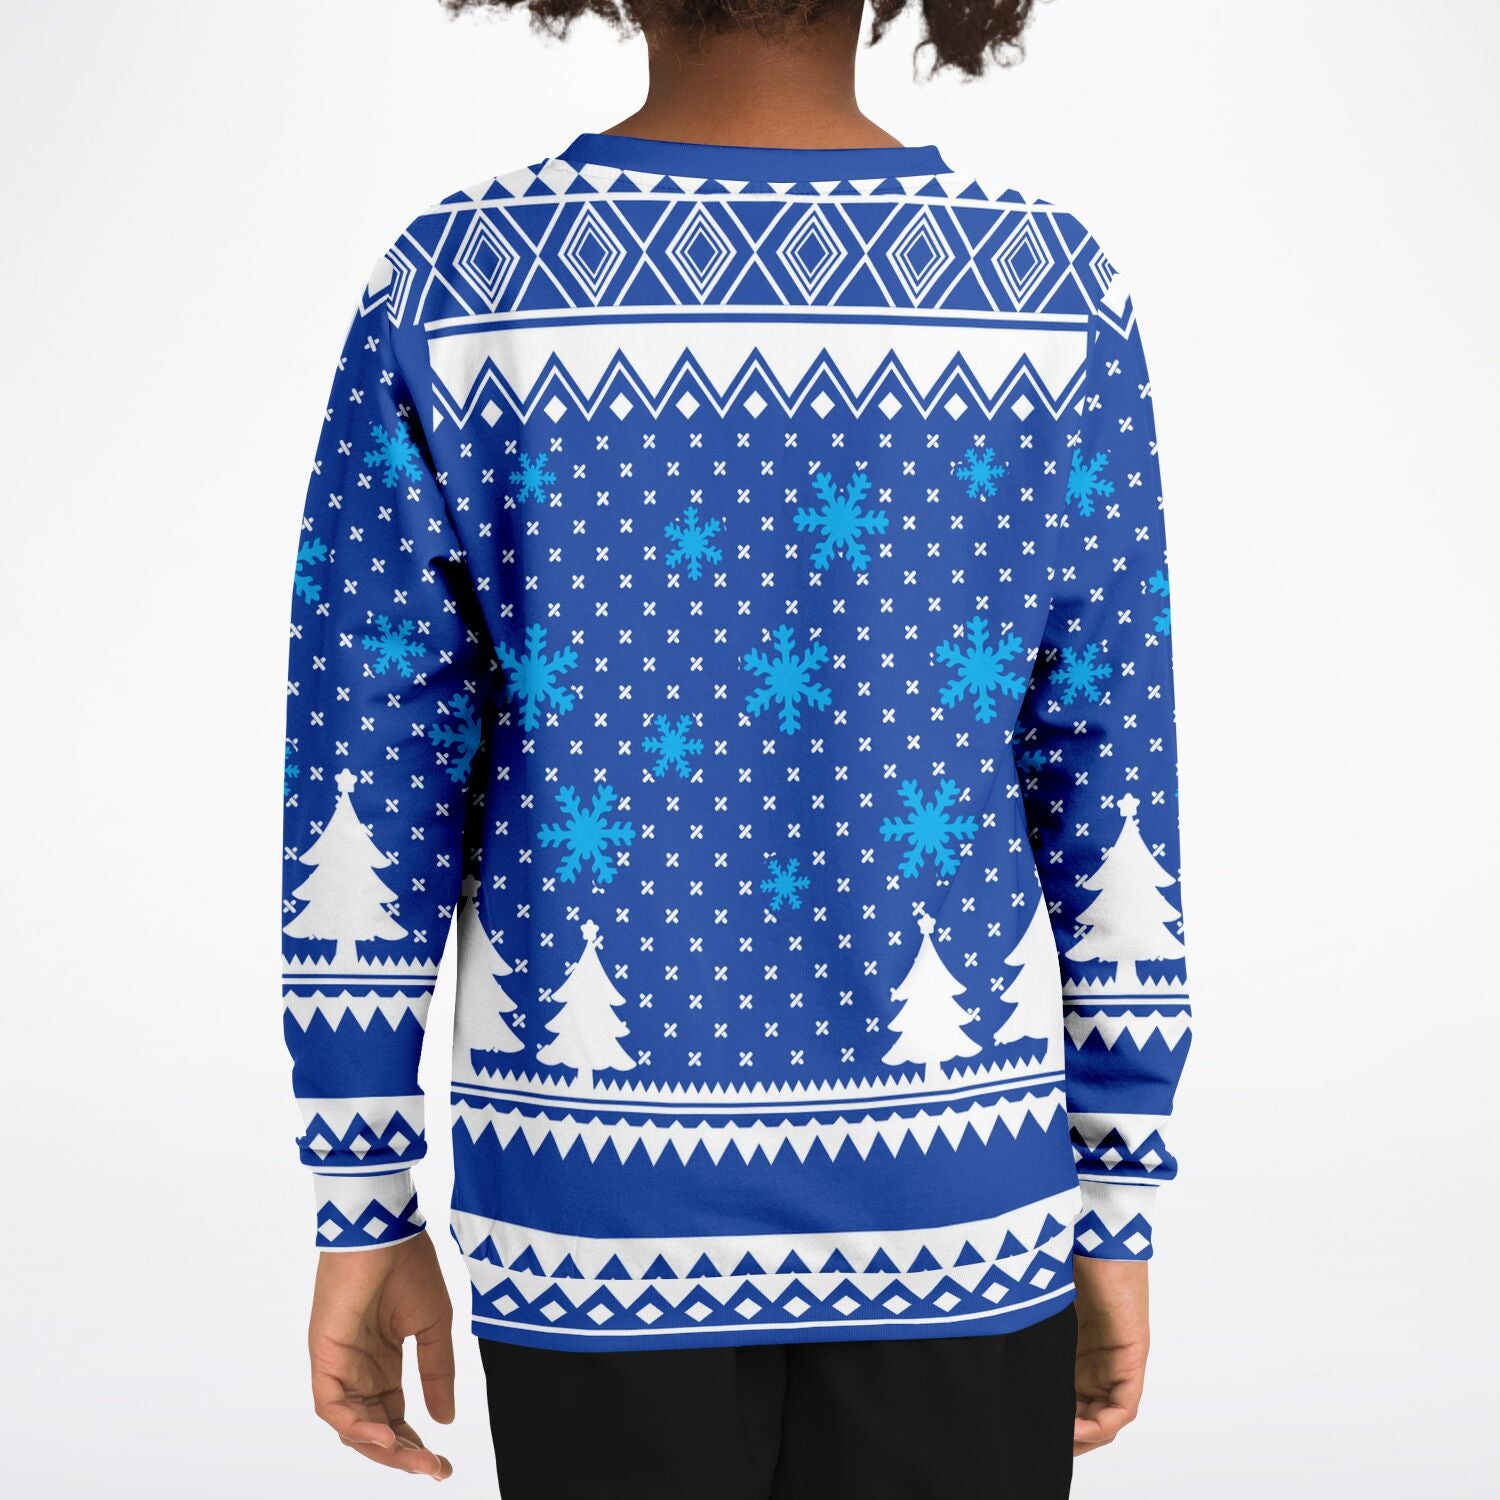 Ugly Holiday Sweater-Prickly and Lit-Kids/Youth